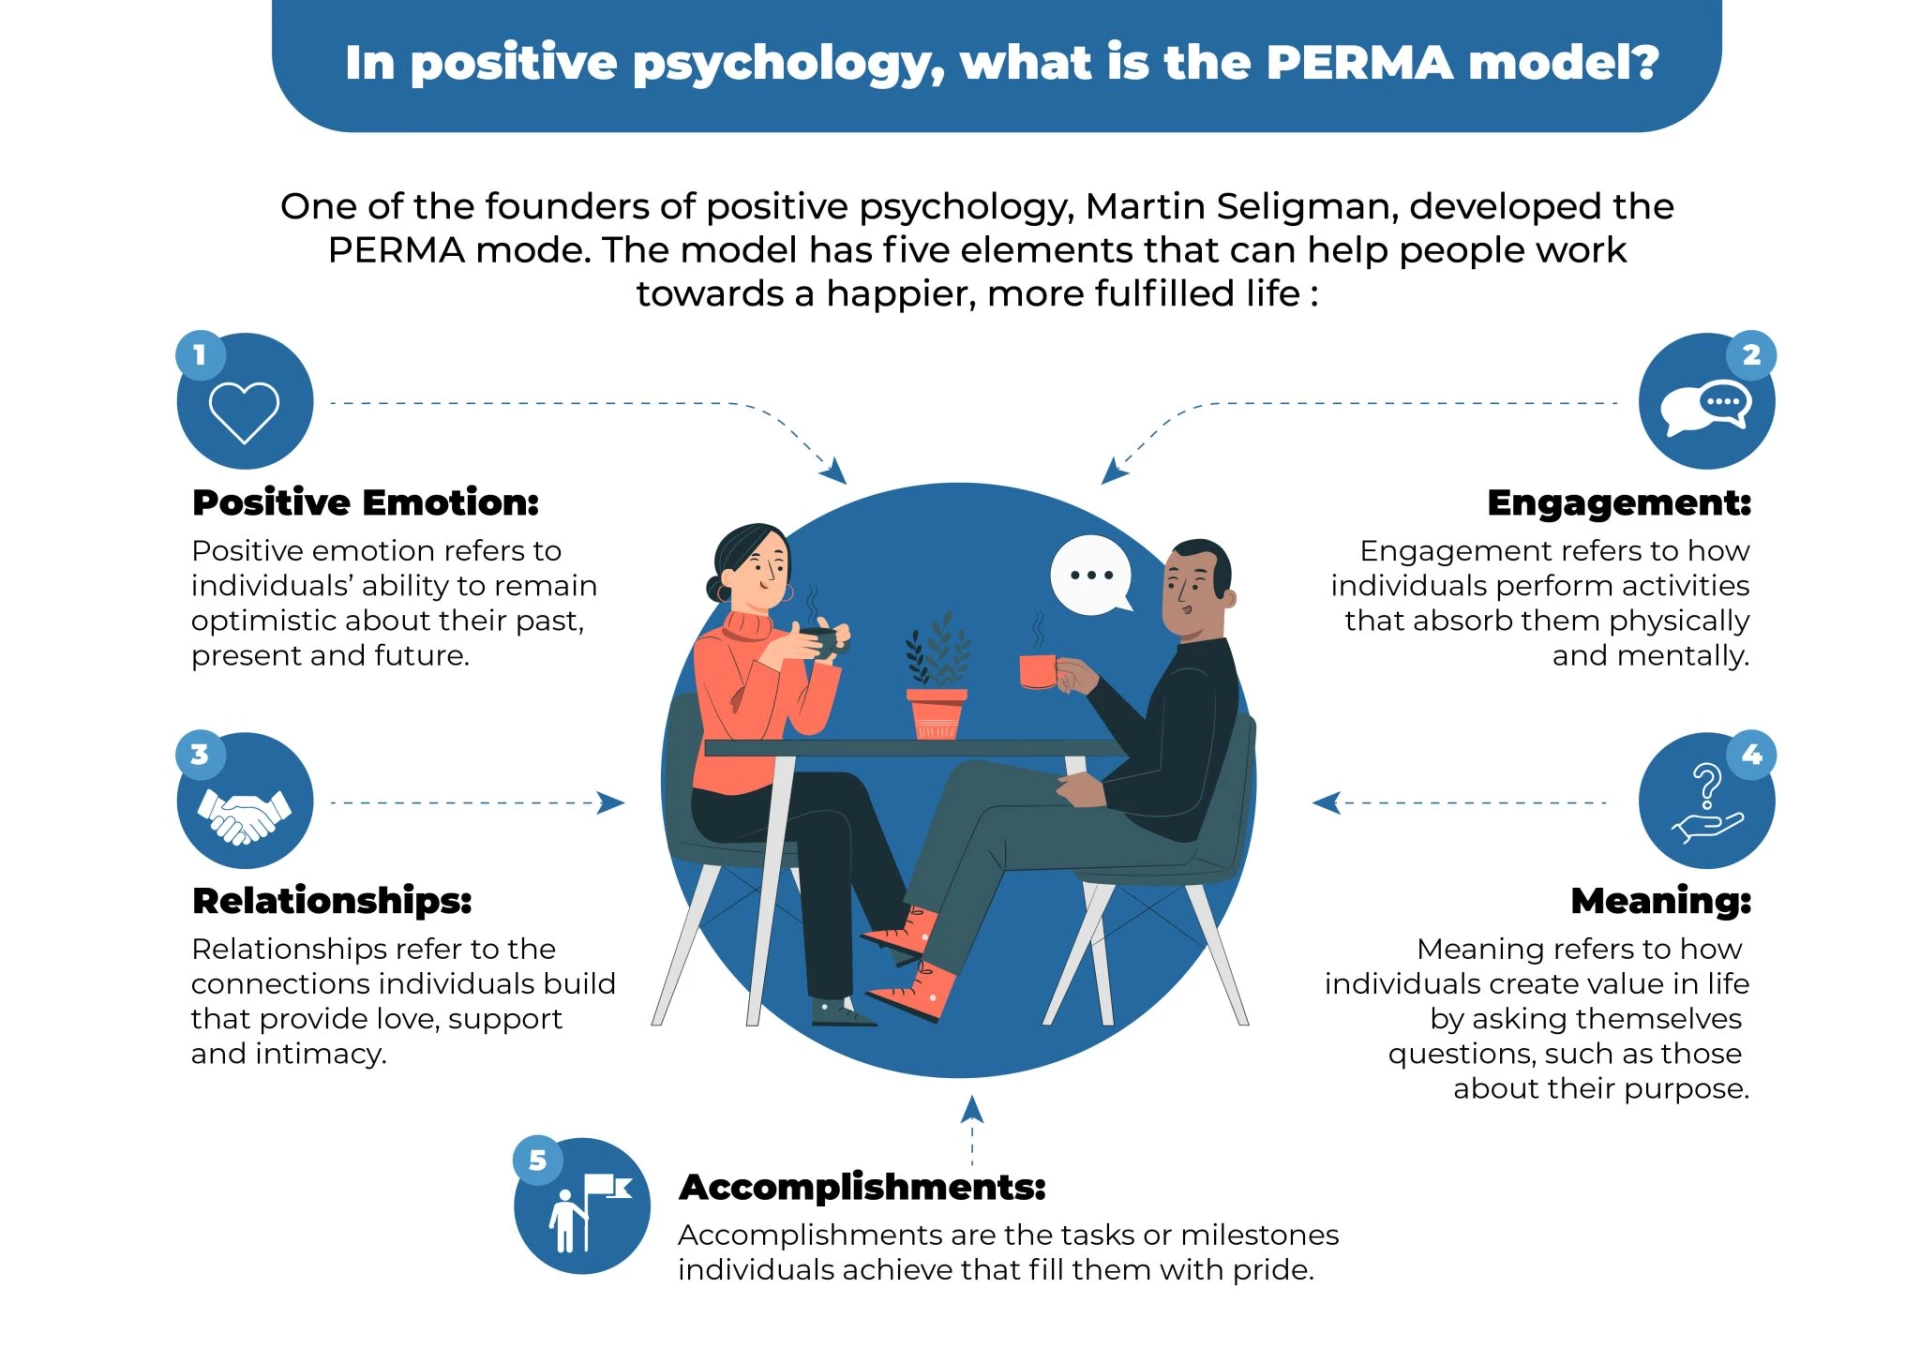 IN POSITIVE PSYCHOLOGY, WHAT IS THE PERMA MODEL?